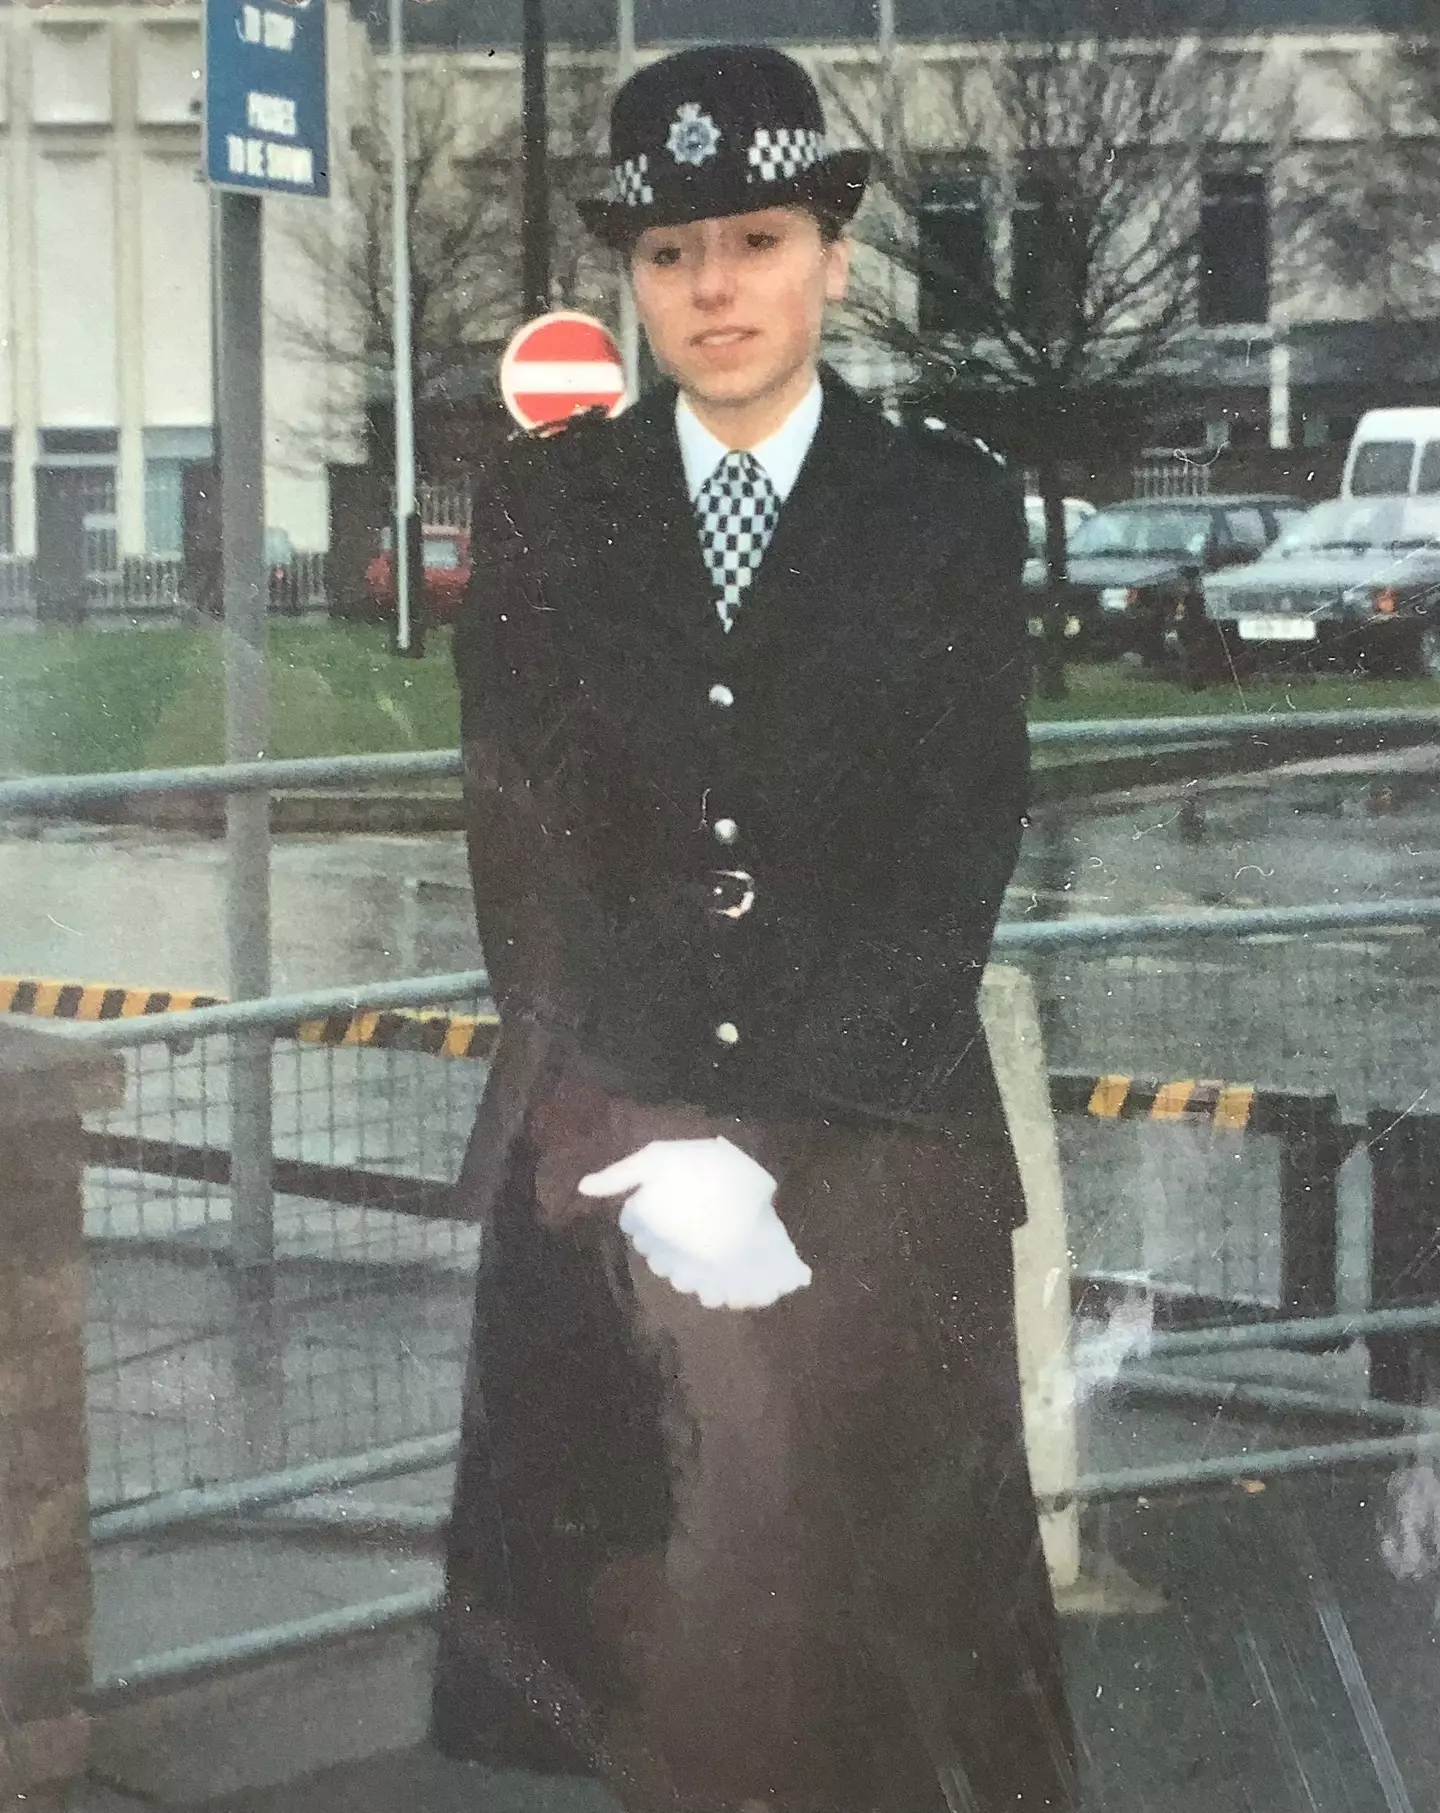 Michelle in her younger years as a police officer.